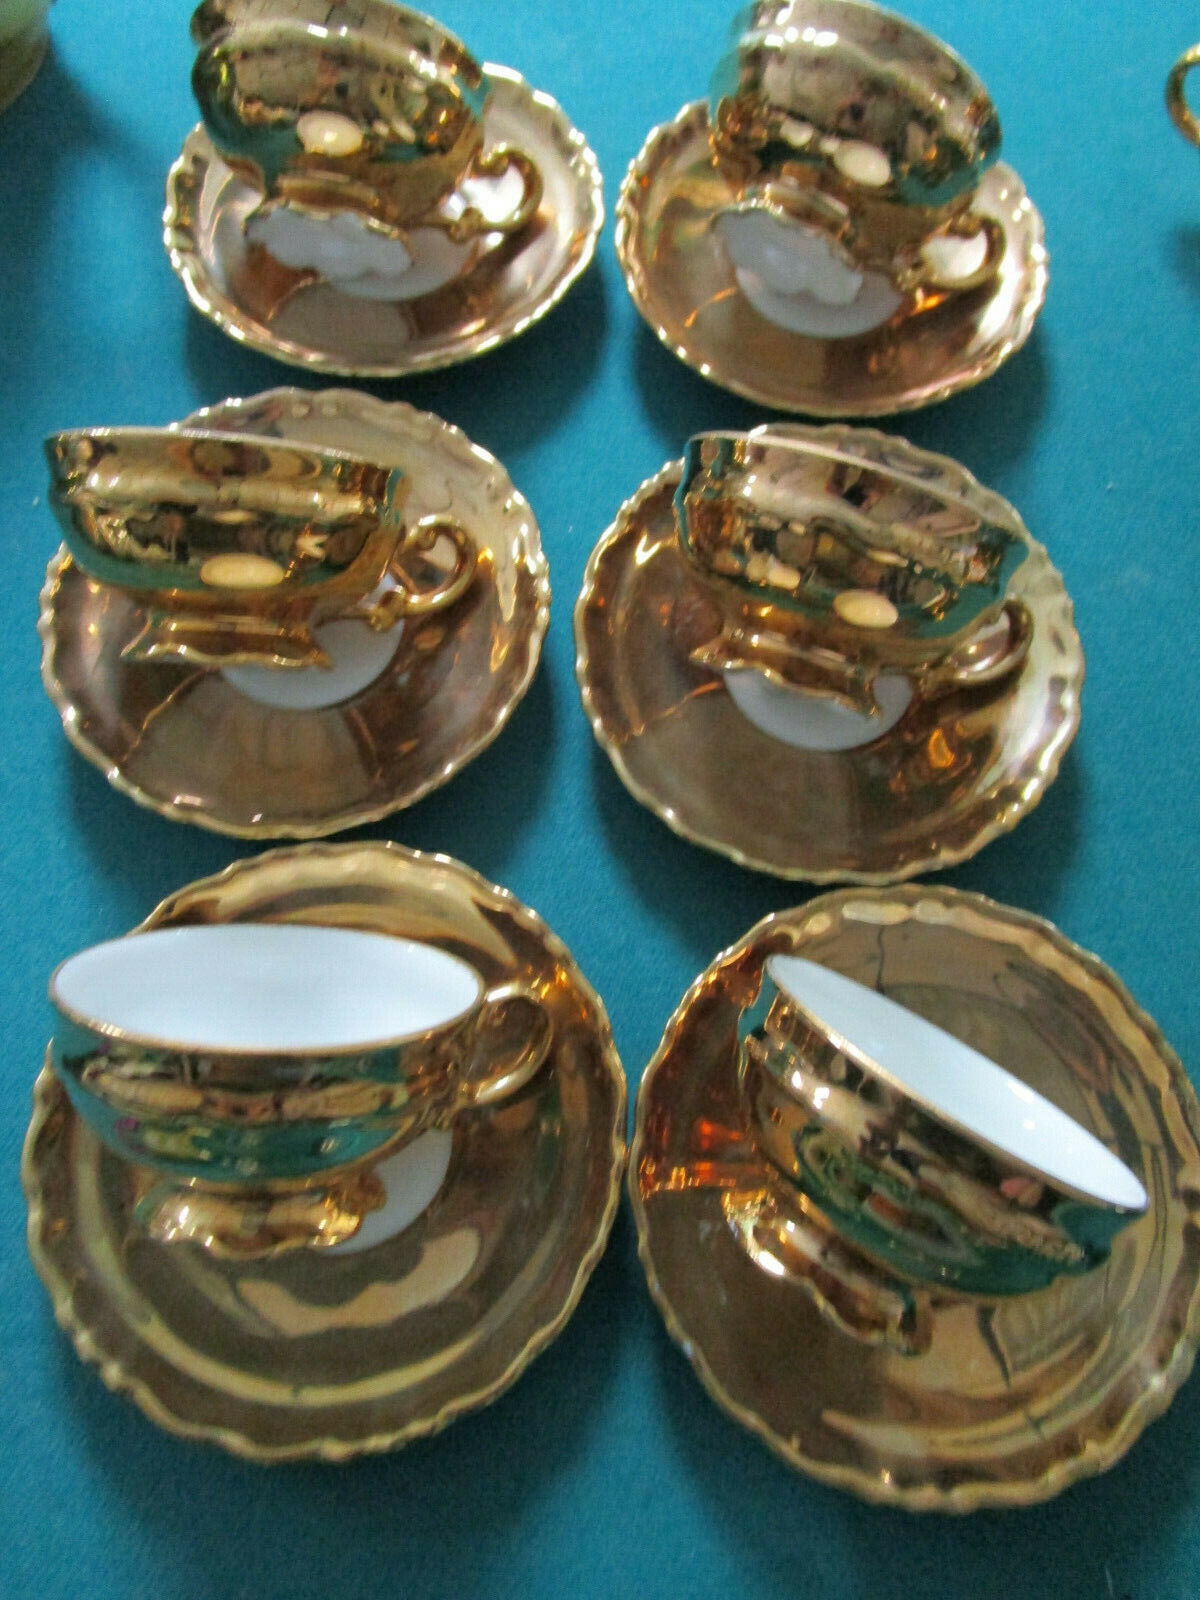 Primary image for Mitterteich Bavaria Gold 6 Coffeecups And Saucers - Creamer - Pick One